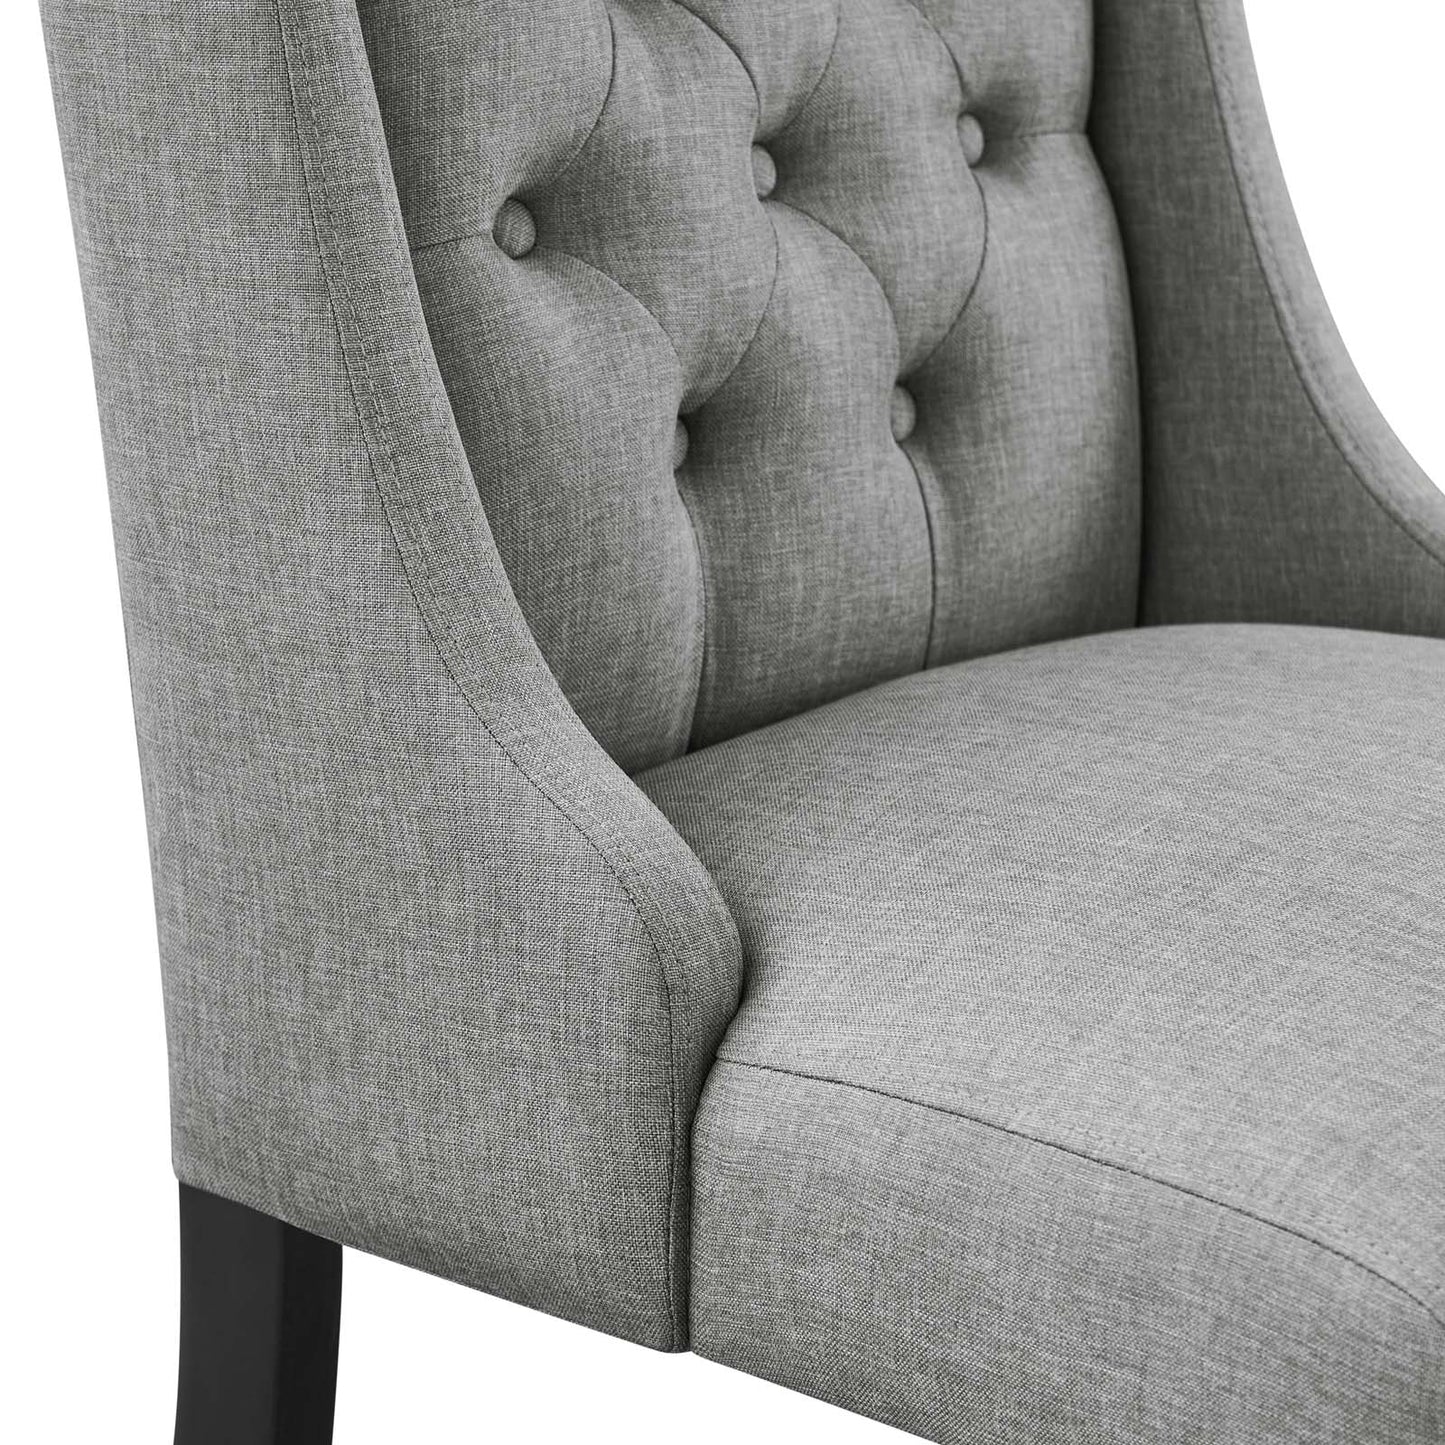 Baronet Button Tufted Fabric Dining Chair Light Gray EEI-2235-LGR